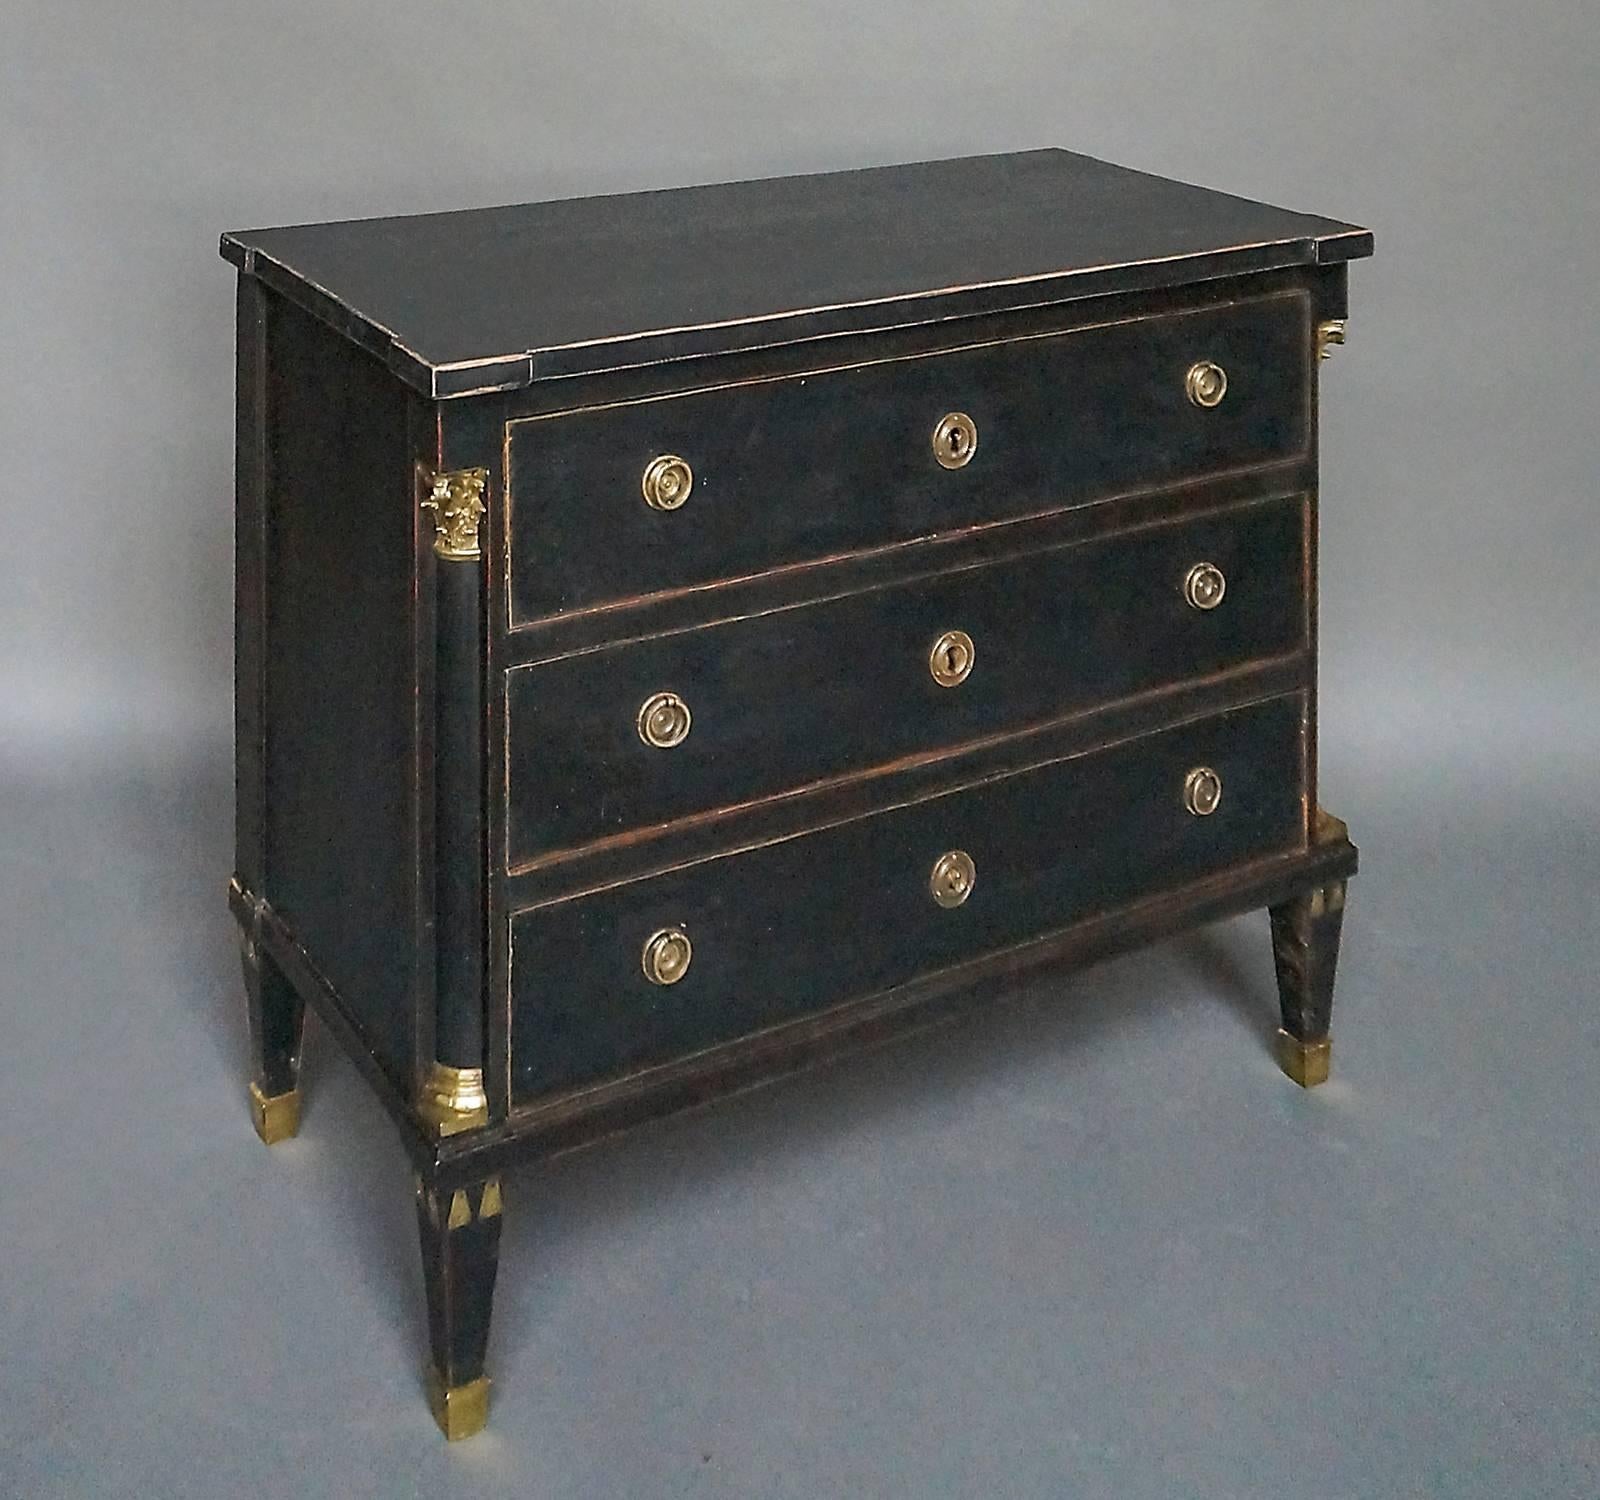 Late Gustavian chest of drawers, Sweden, circa 1780, with deeply recessed quarter-round columns with brass capitals and bases at the front corners. Tapering square legs with applied decorative elements and brass caps.